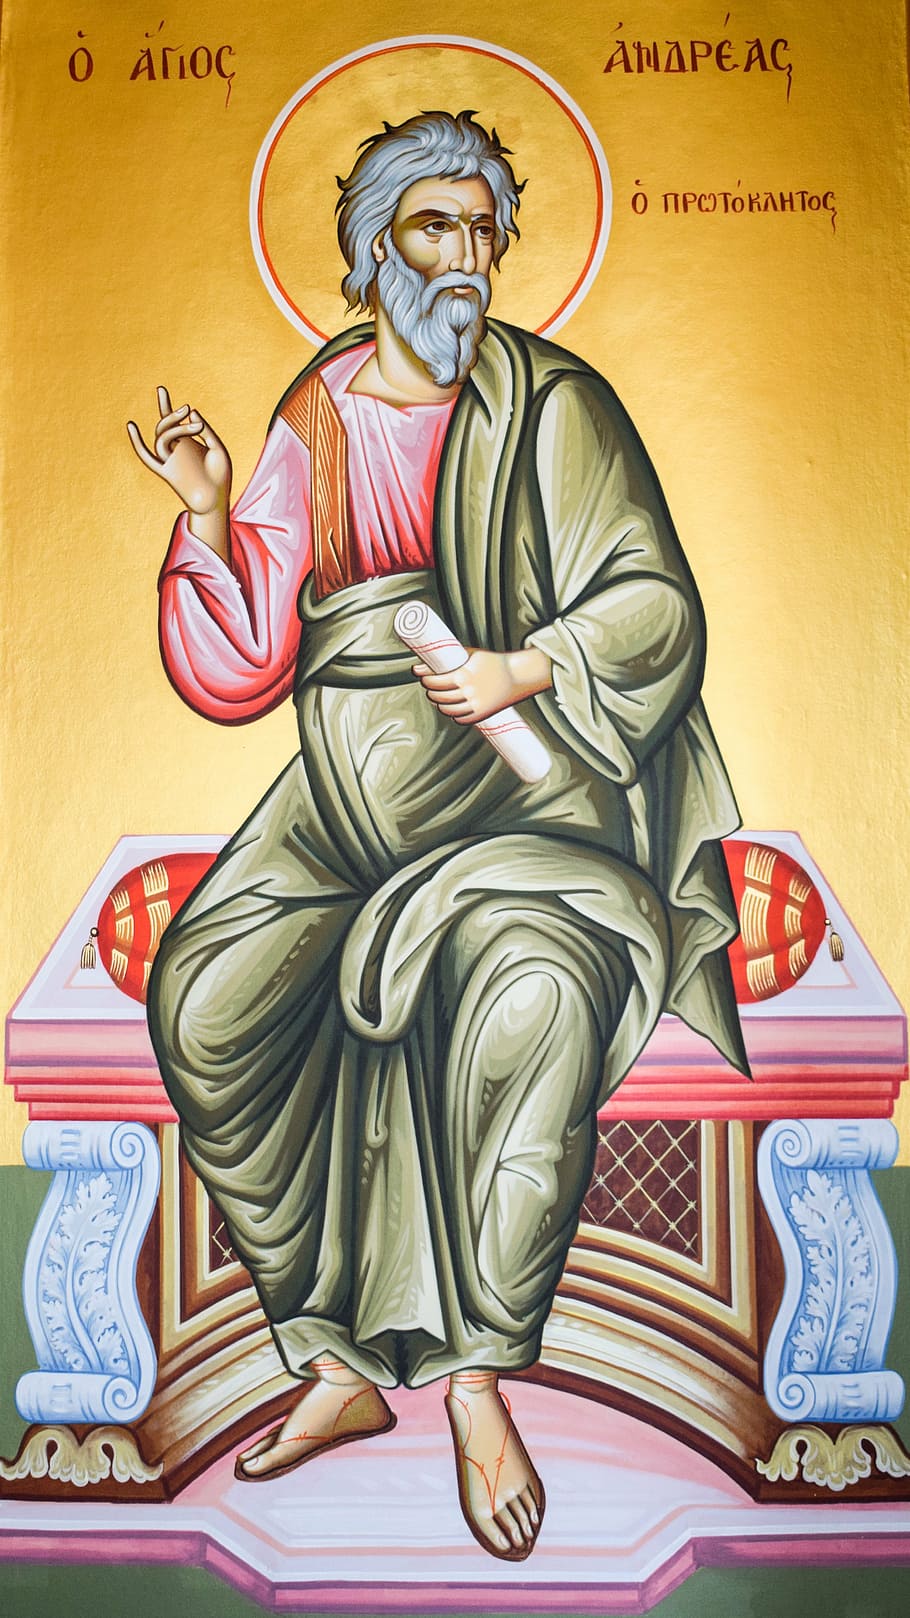 st andrew, saint, iconography, painting, byzantine style, religion, orthodox, christianity, church, ayios andreas